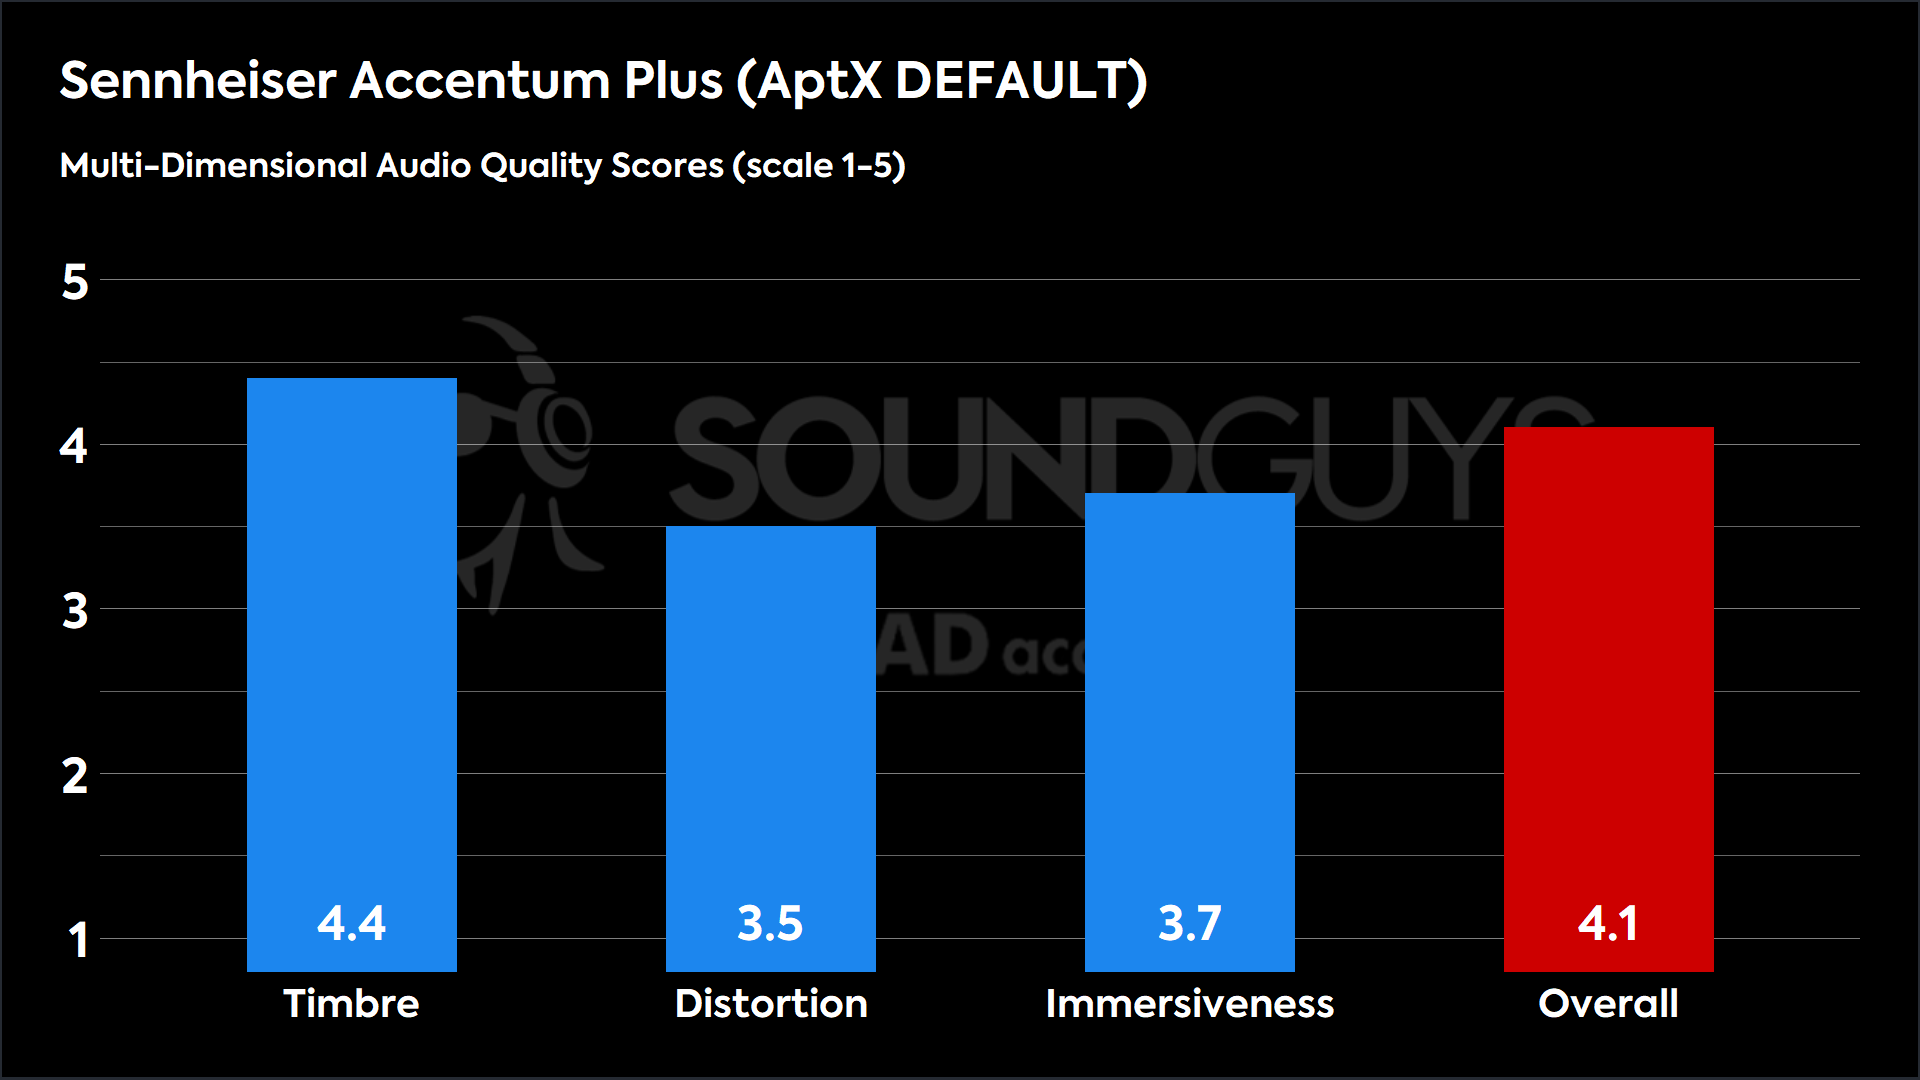 This chart shows the MDAQS results for the Sennheiser Accentum Plus in AptX DEFAULT mode. The Timbre score is 4.4, The Distortion score is 3.5, the Immersiveness score is 3.7, and the Overall Score is 4.1 )